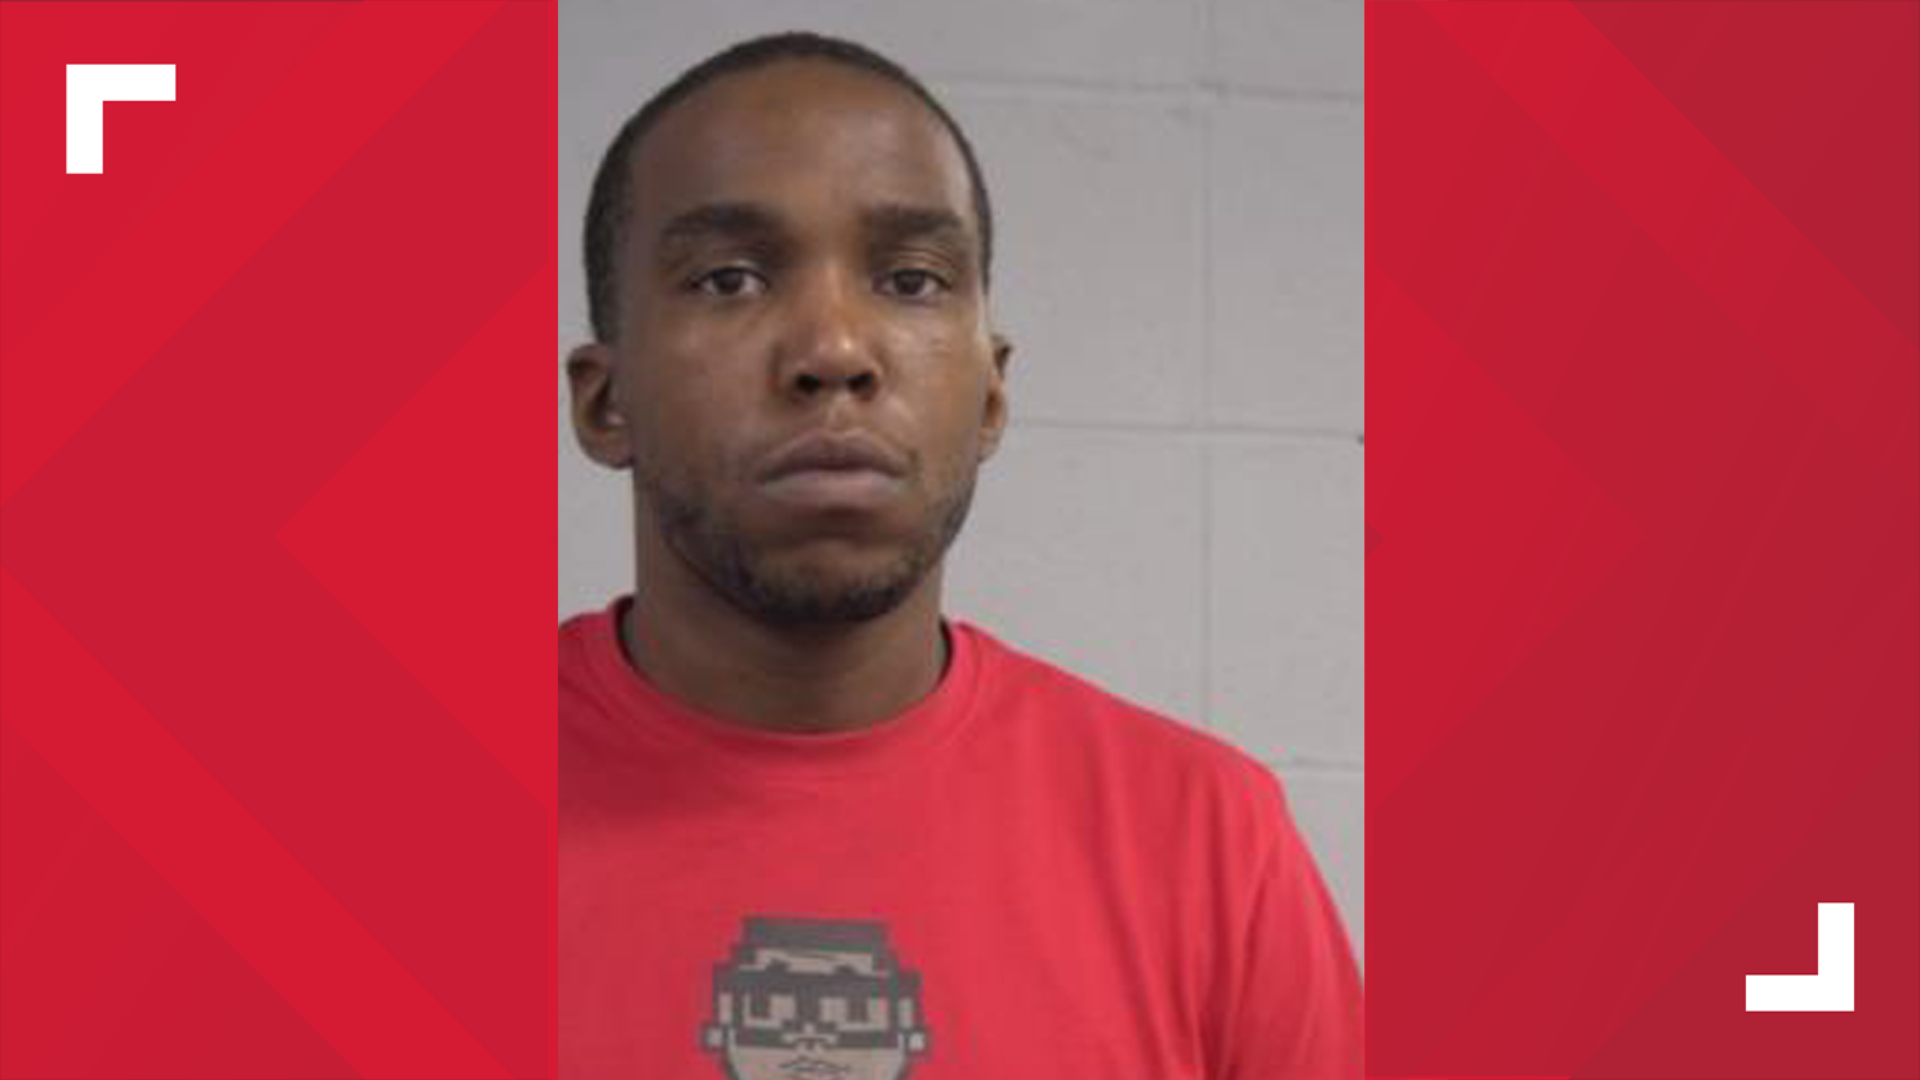 Jamarcus Glover, Breonna Taylor's ex-boyfriend, entered a not guilty plea during his court hearing after being arrested this week on a warrant issued in July.